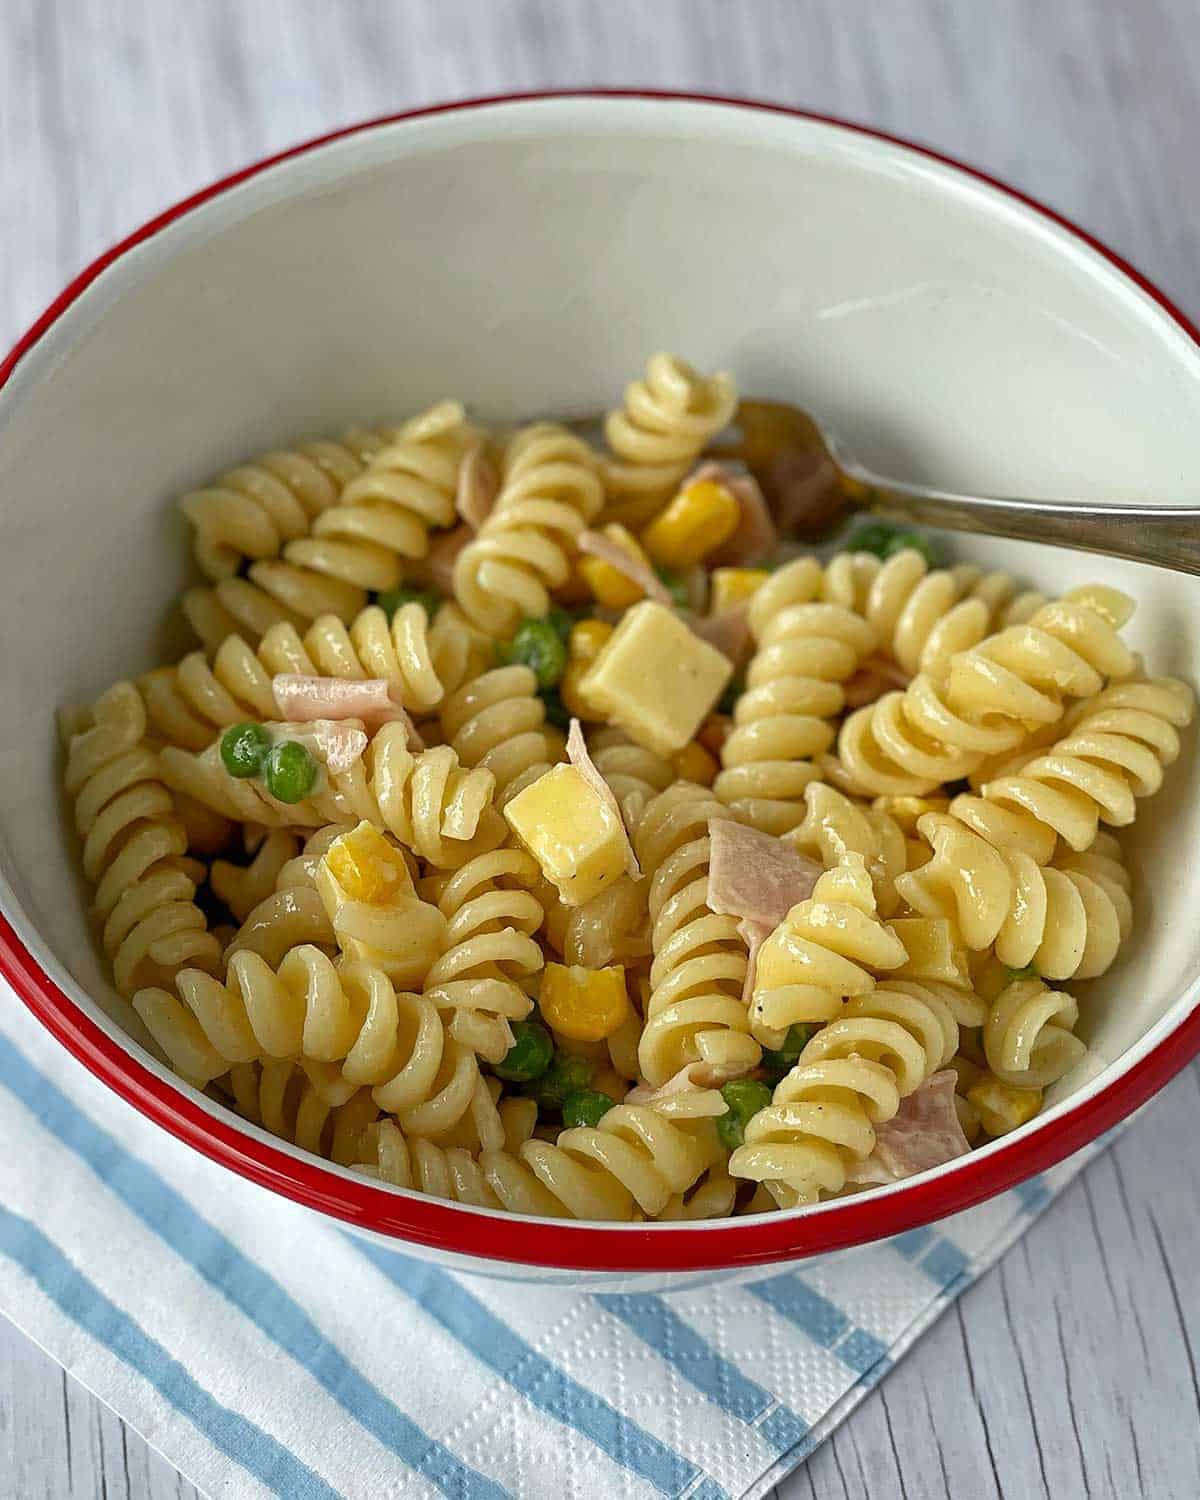 A bowl of Kids' Pasta Salad sitting on a blue and white striped napkin.